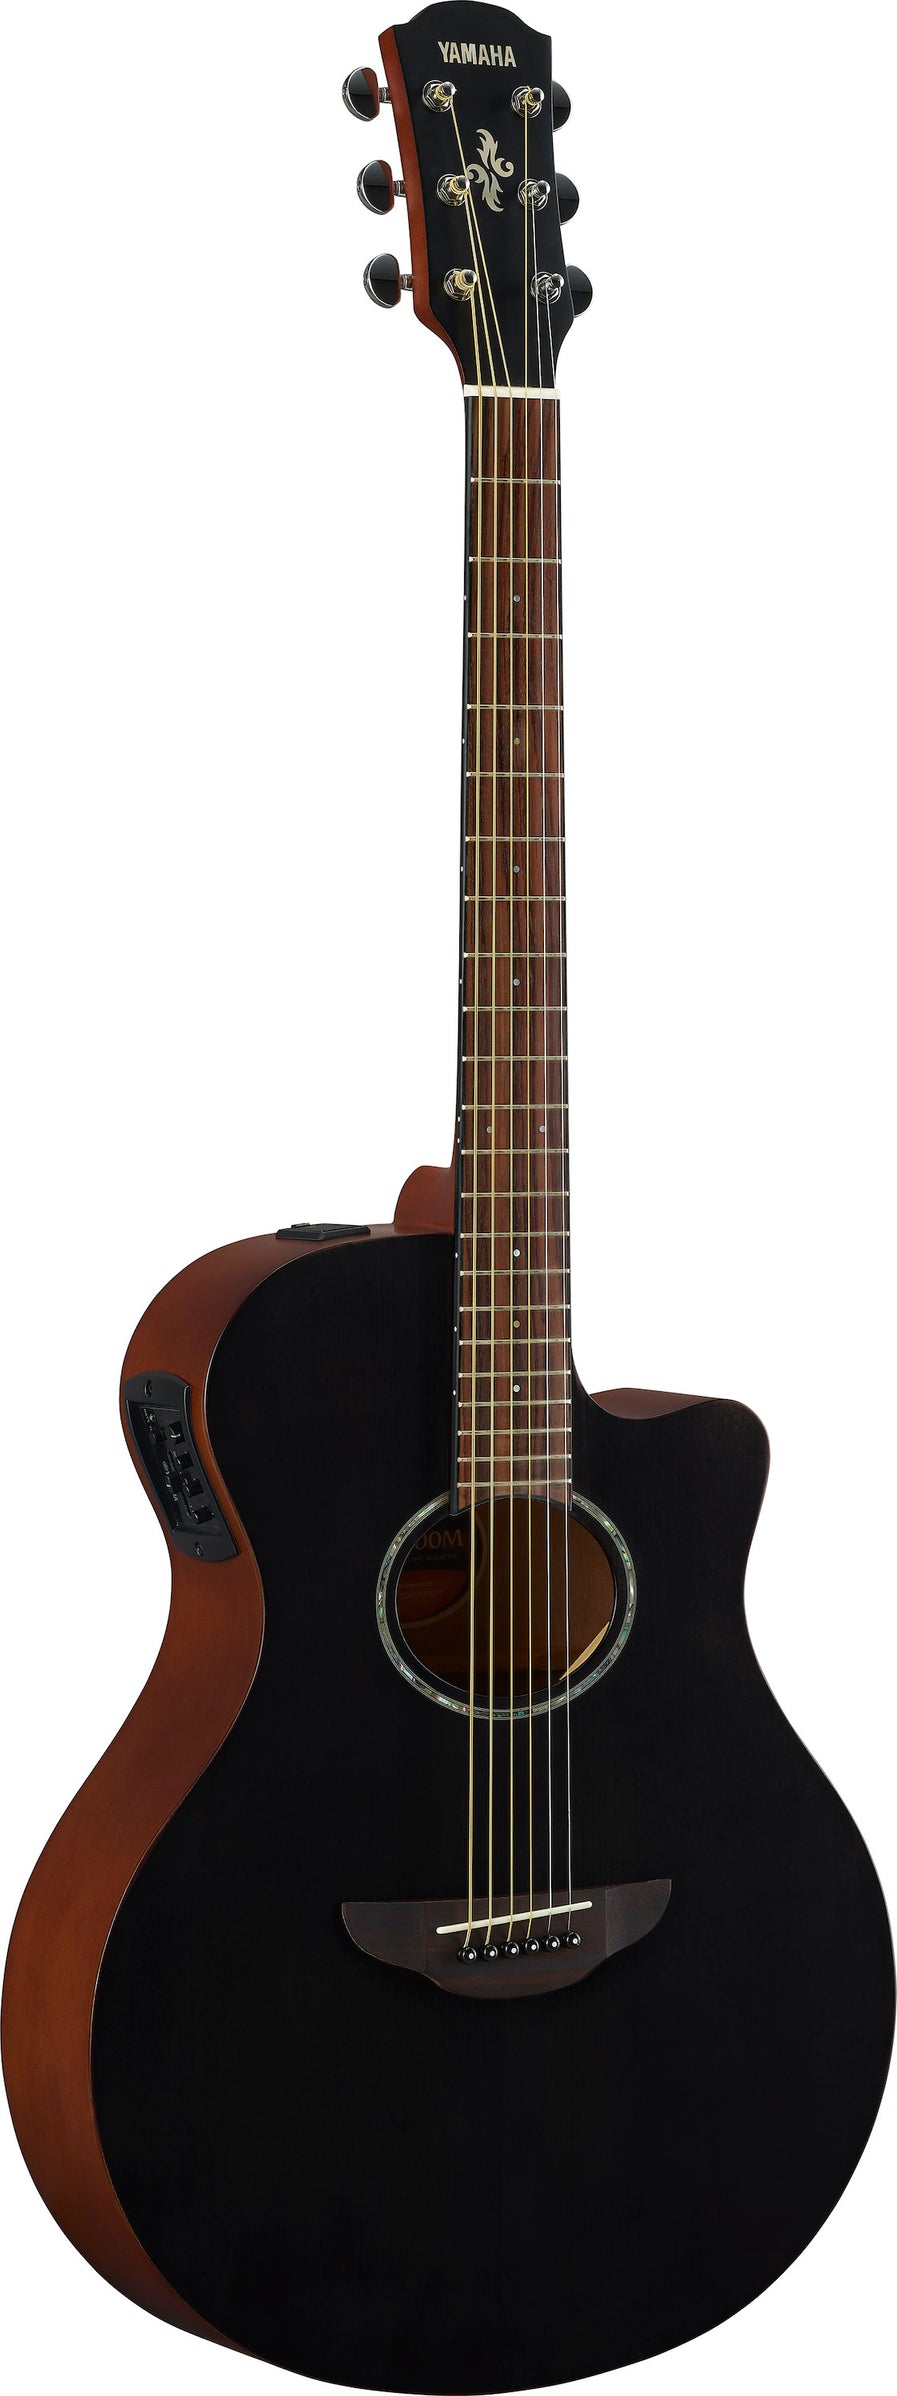 Yamaha APX 600 Matte - Smoky Black Thinline Acoustic Guitar with Cutaway and Pickup-Buzz Music